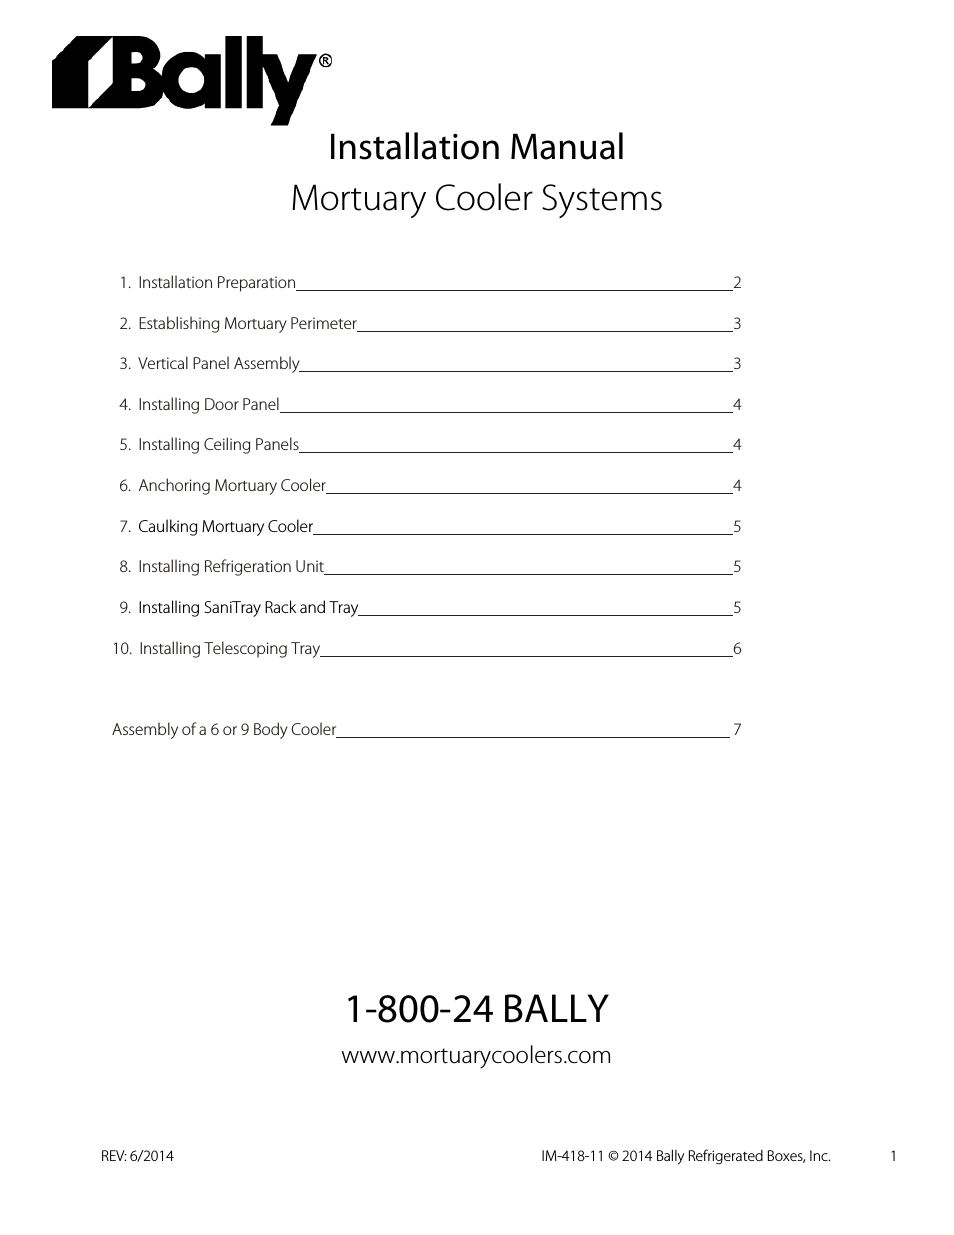 Mortuary Cooler Systems